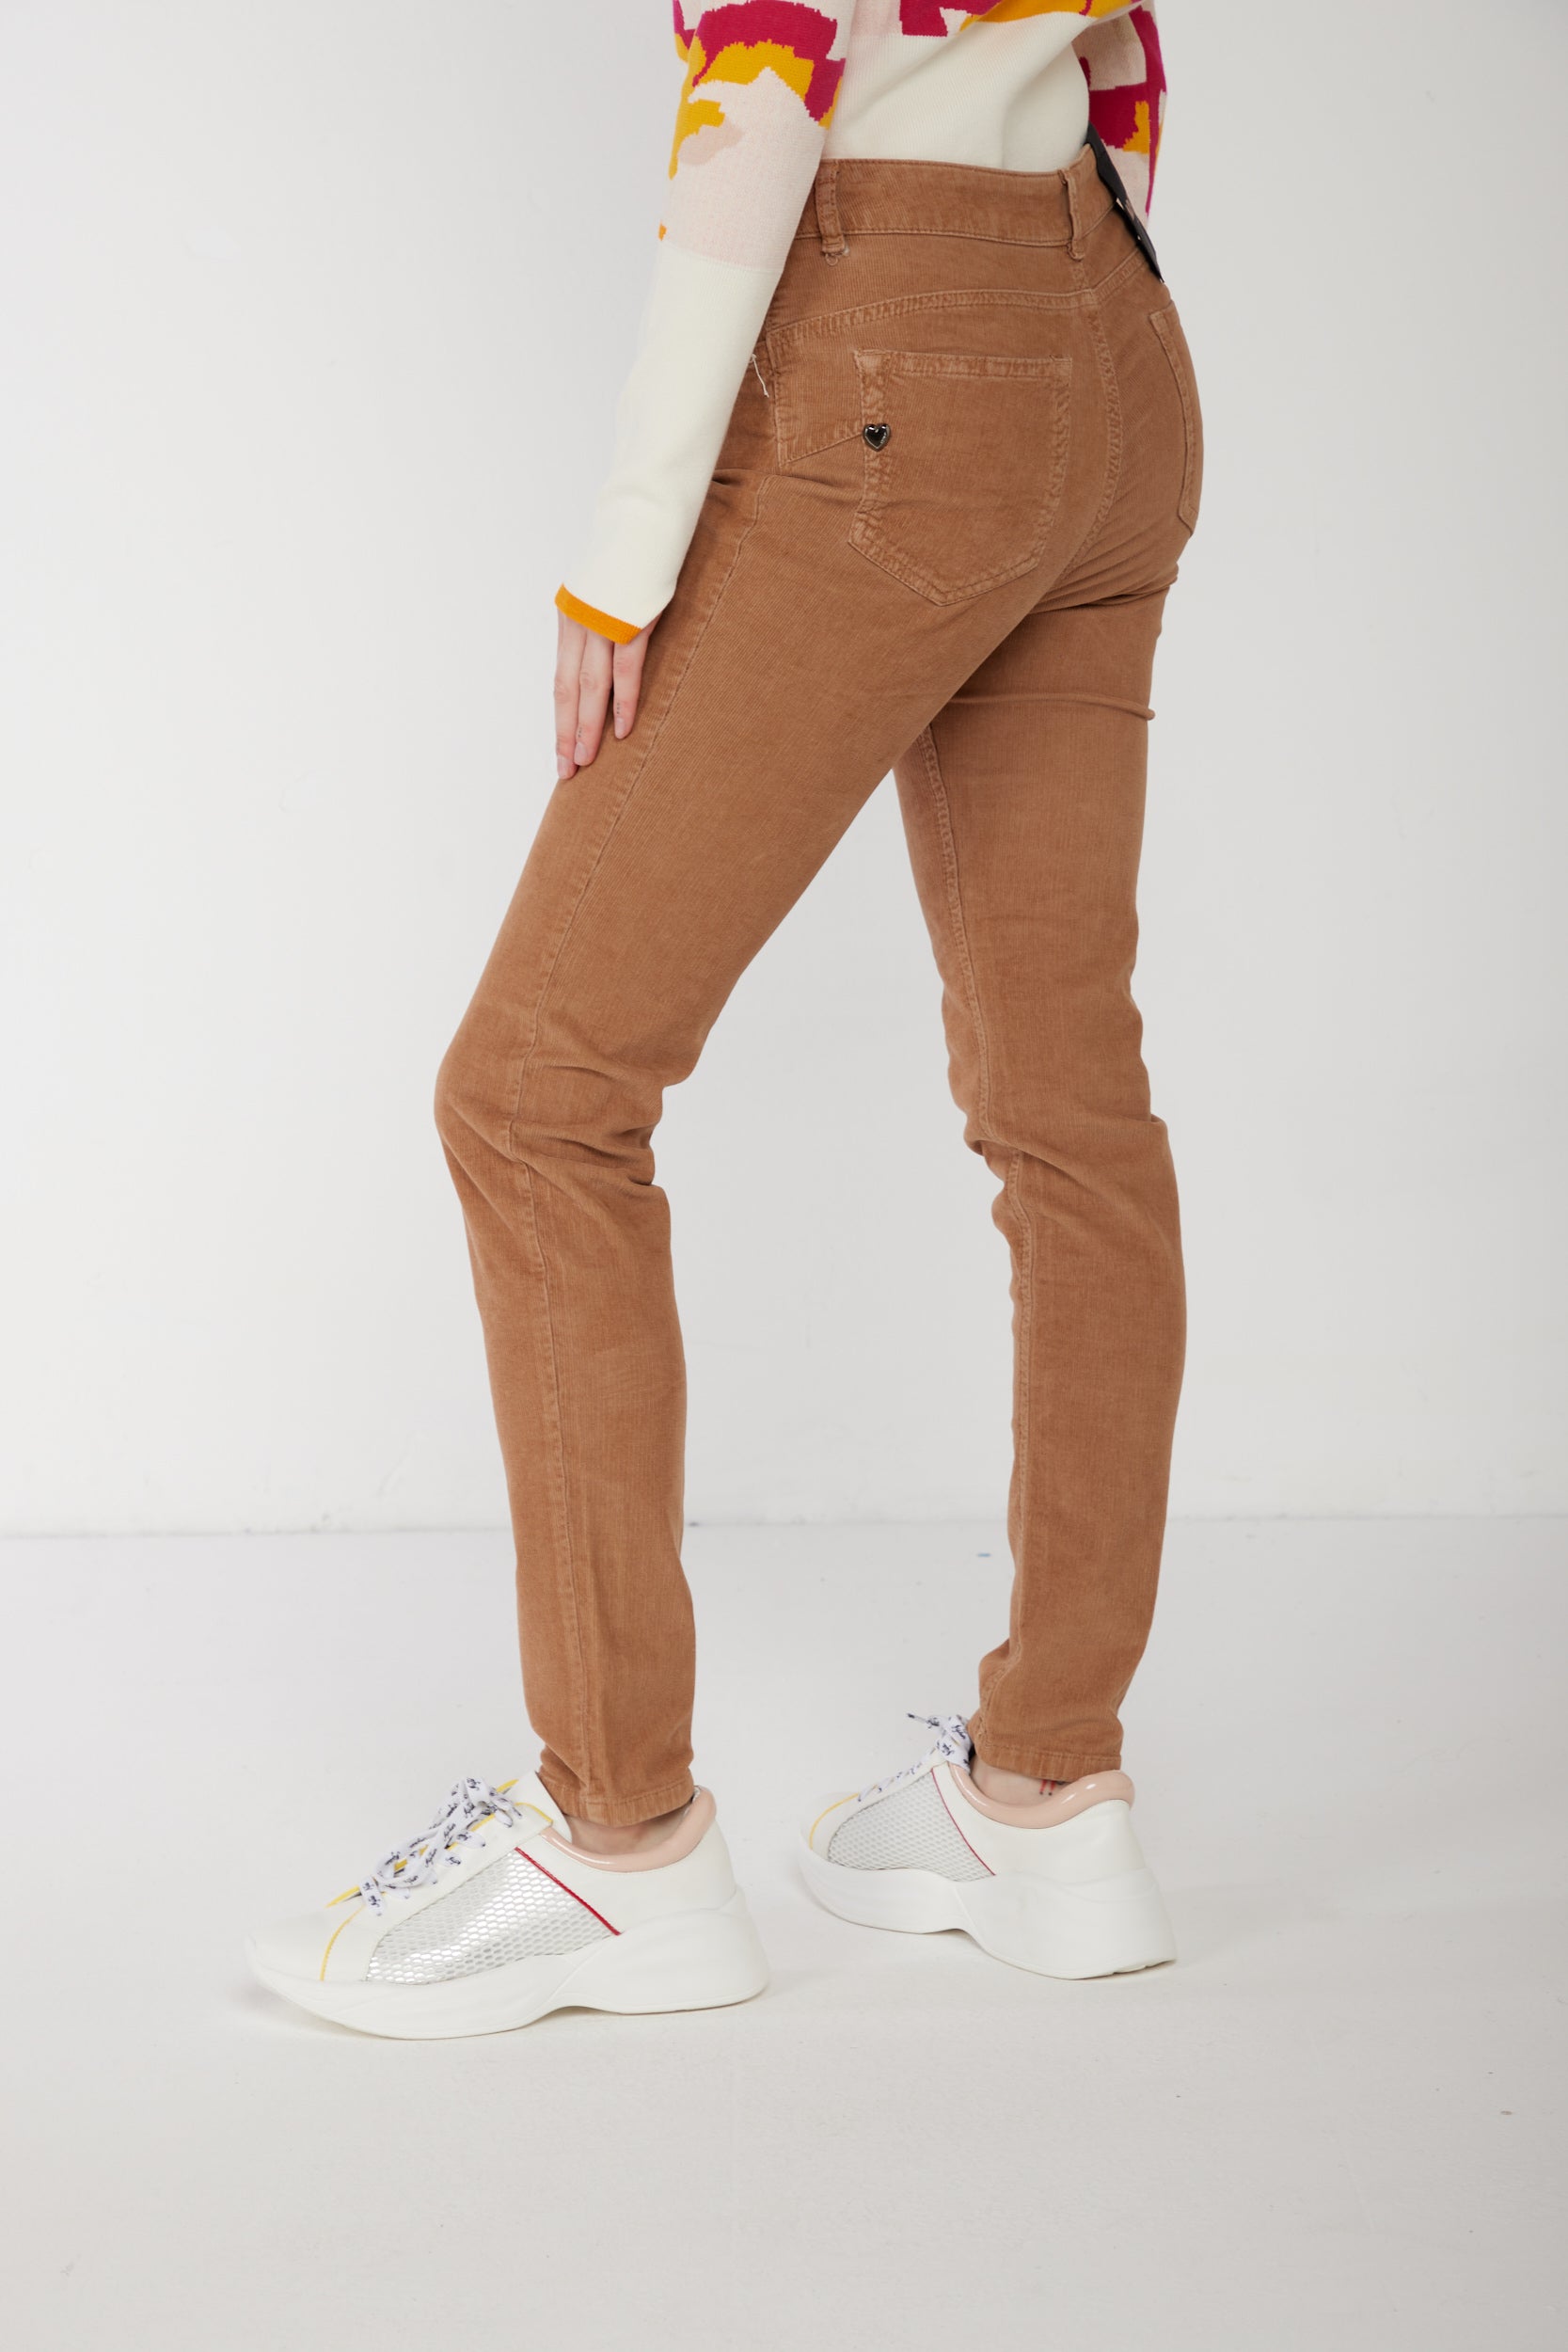 TWINSET Caramel Trousers